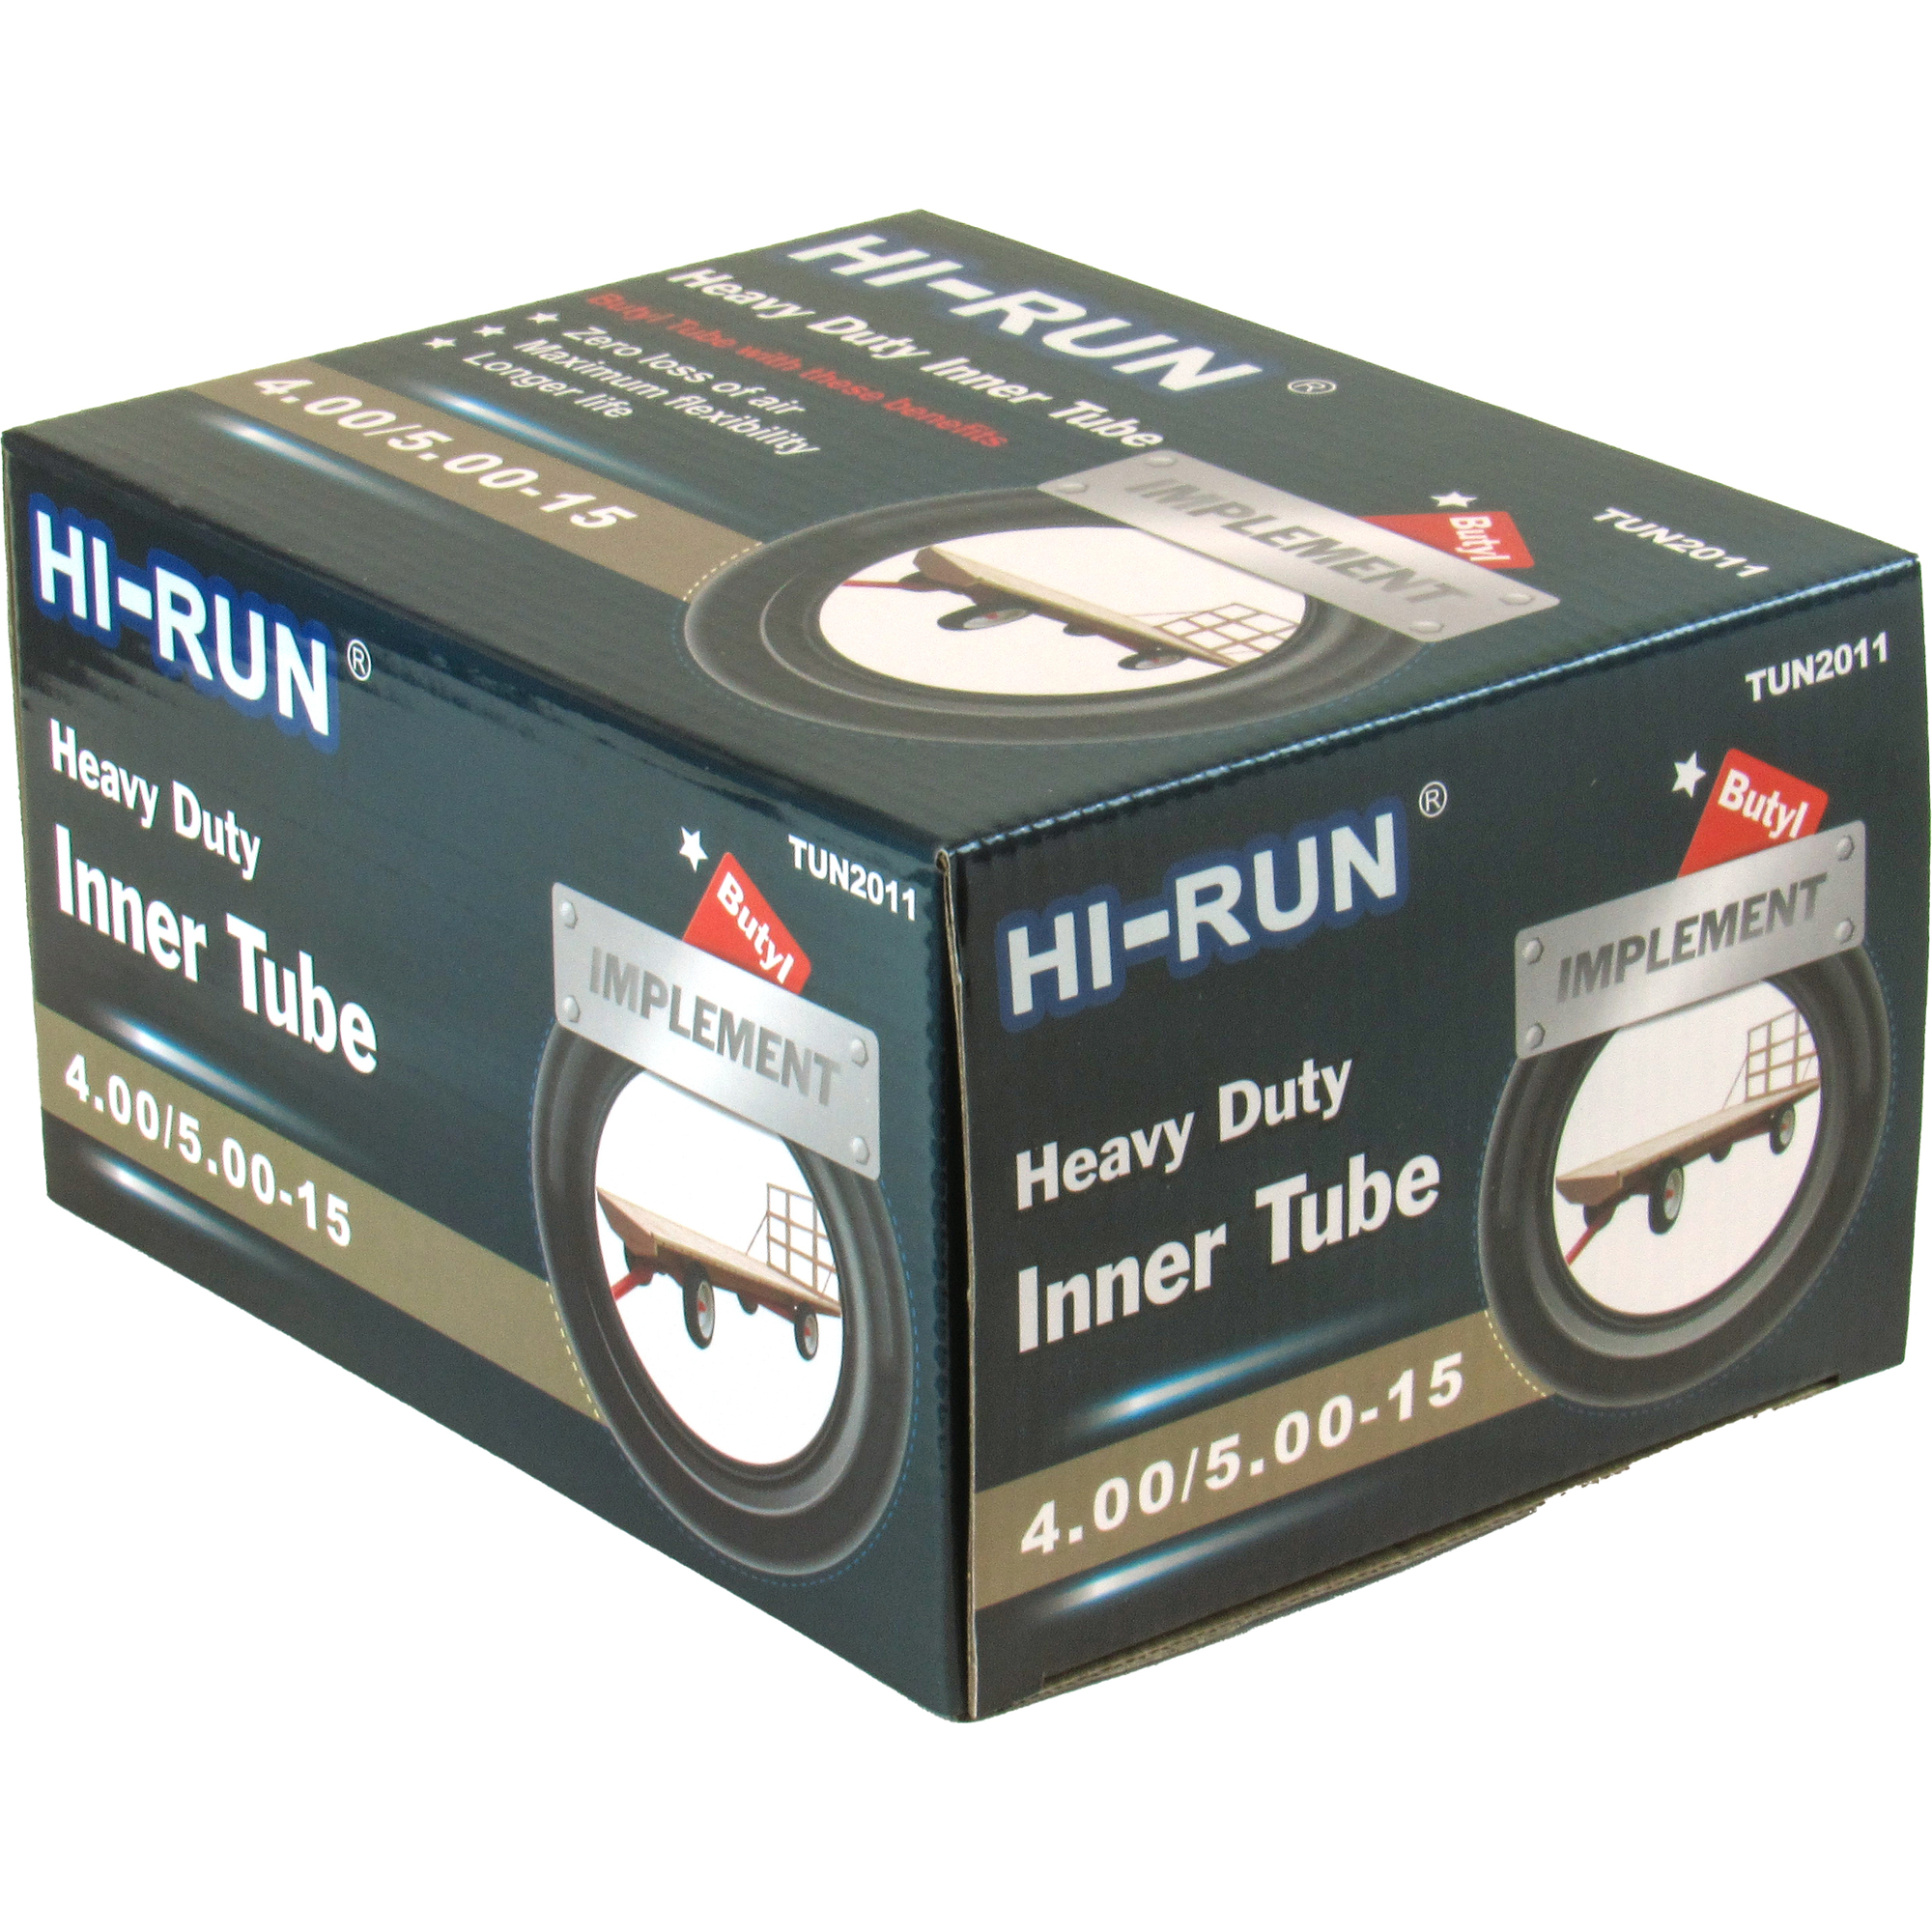 HI-RUN, Tube 4.00/5.00-15 (TR13) Float Implement, Fits Rim Size 15 in, Included (qty.) 1 Model TUN2011